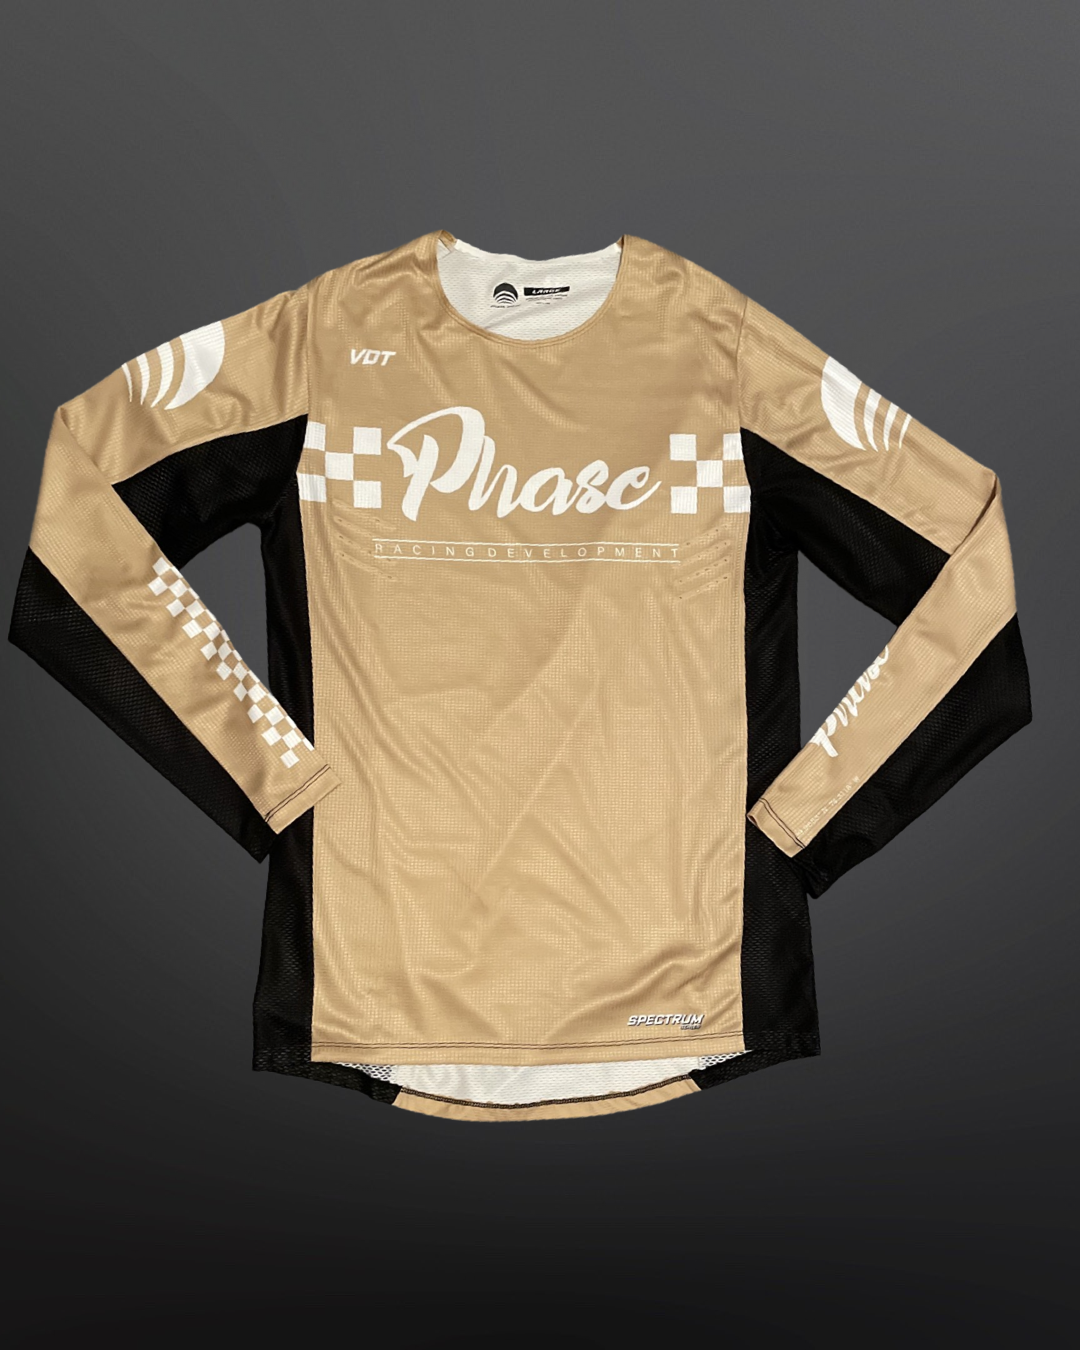 LIMITED EDITION SPECTRUM CHECKERS JERSEY (KHAKI GOLD)